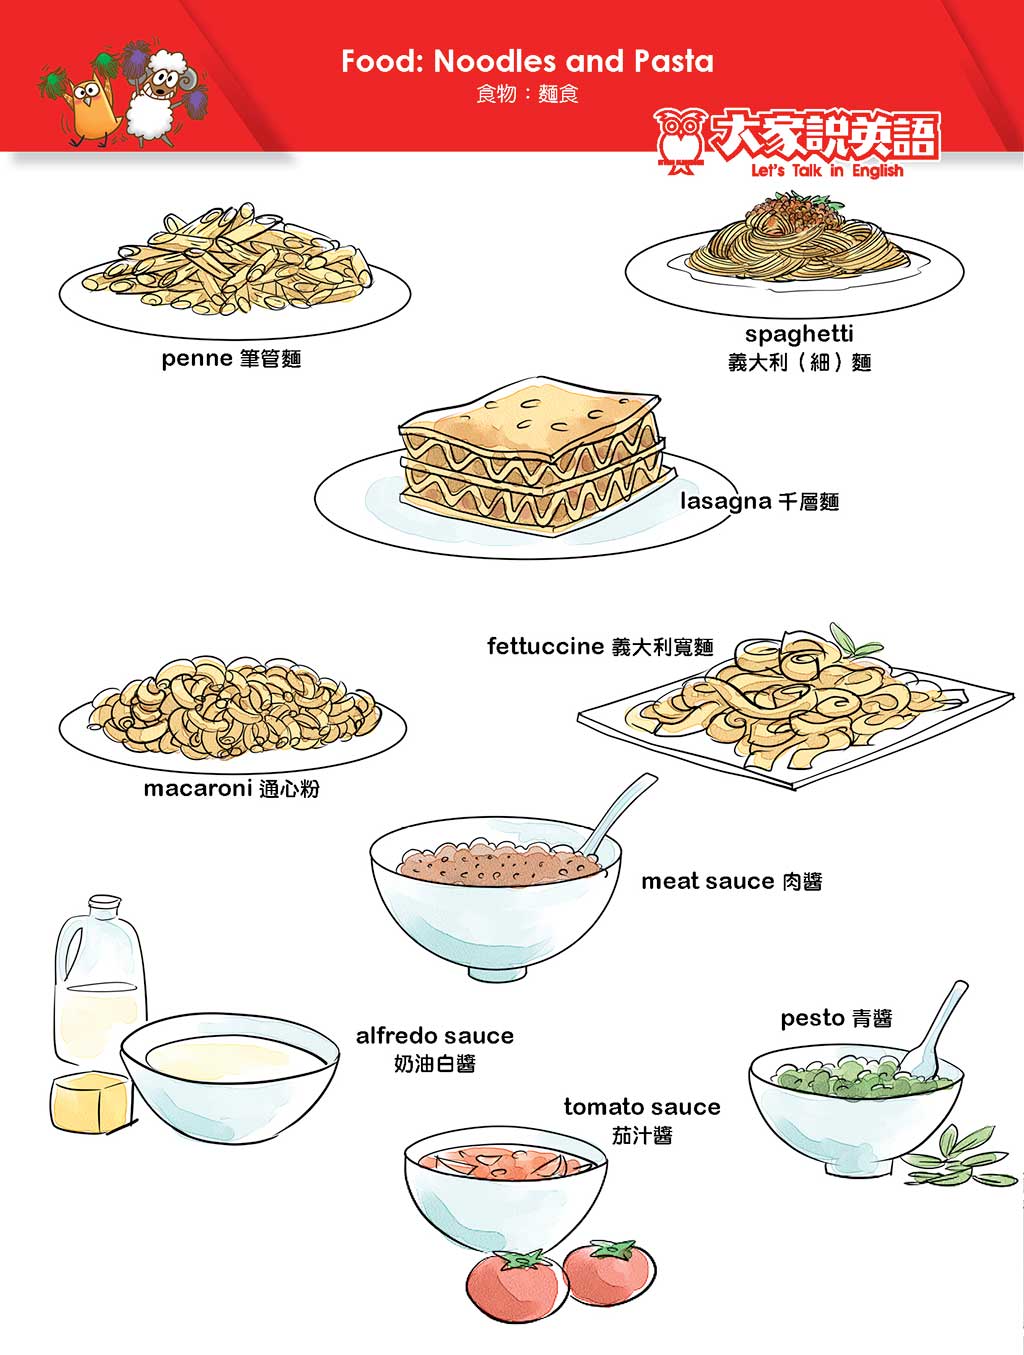 Food: Noodles and Pasta